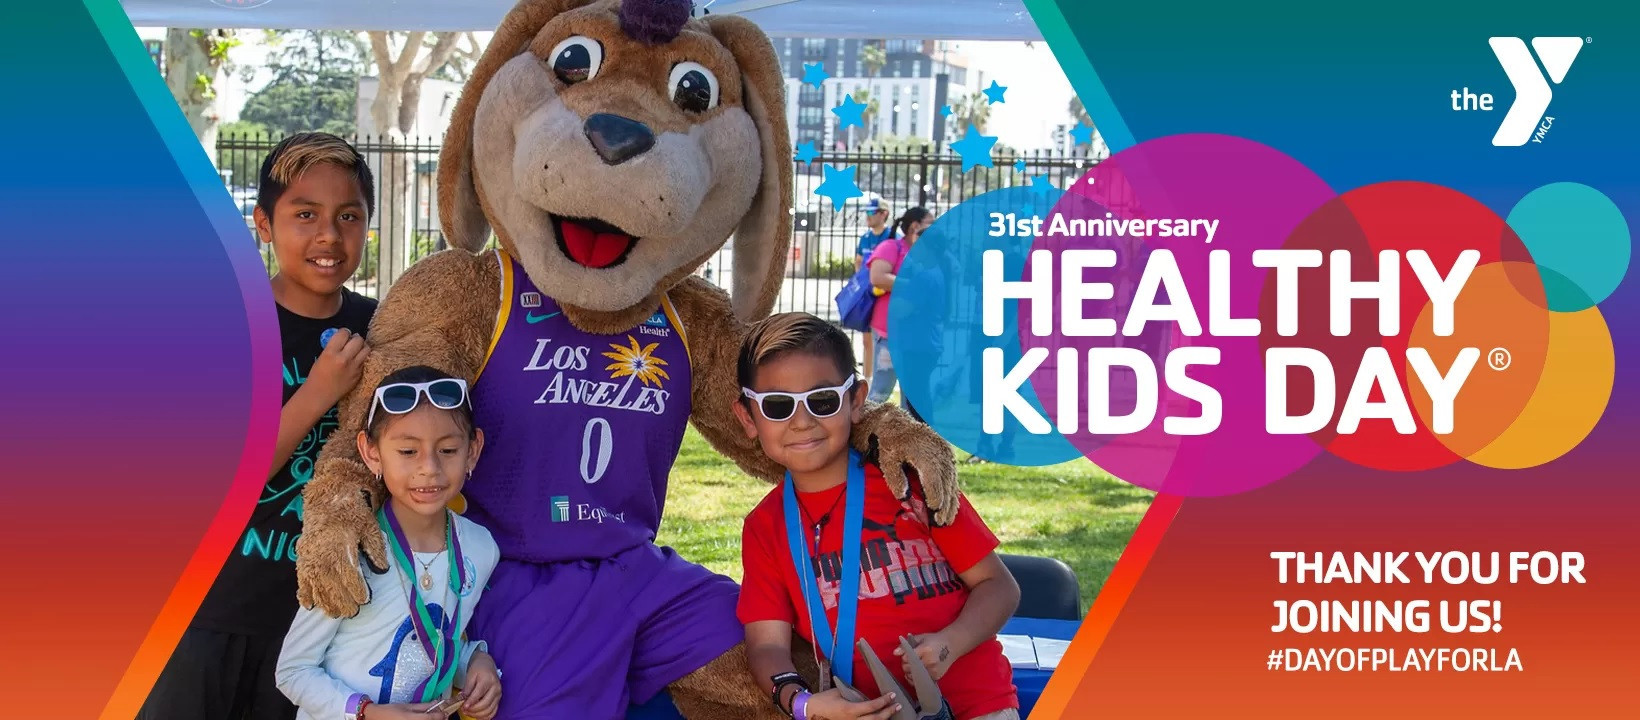 A Healthy Kids Day event was held at the Los Angeles Memorial Coliseum, athletics venue for the 2028 Olympic and Paralympic Games ©YMCA of Metropolitan Los Angeles